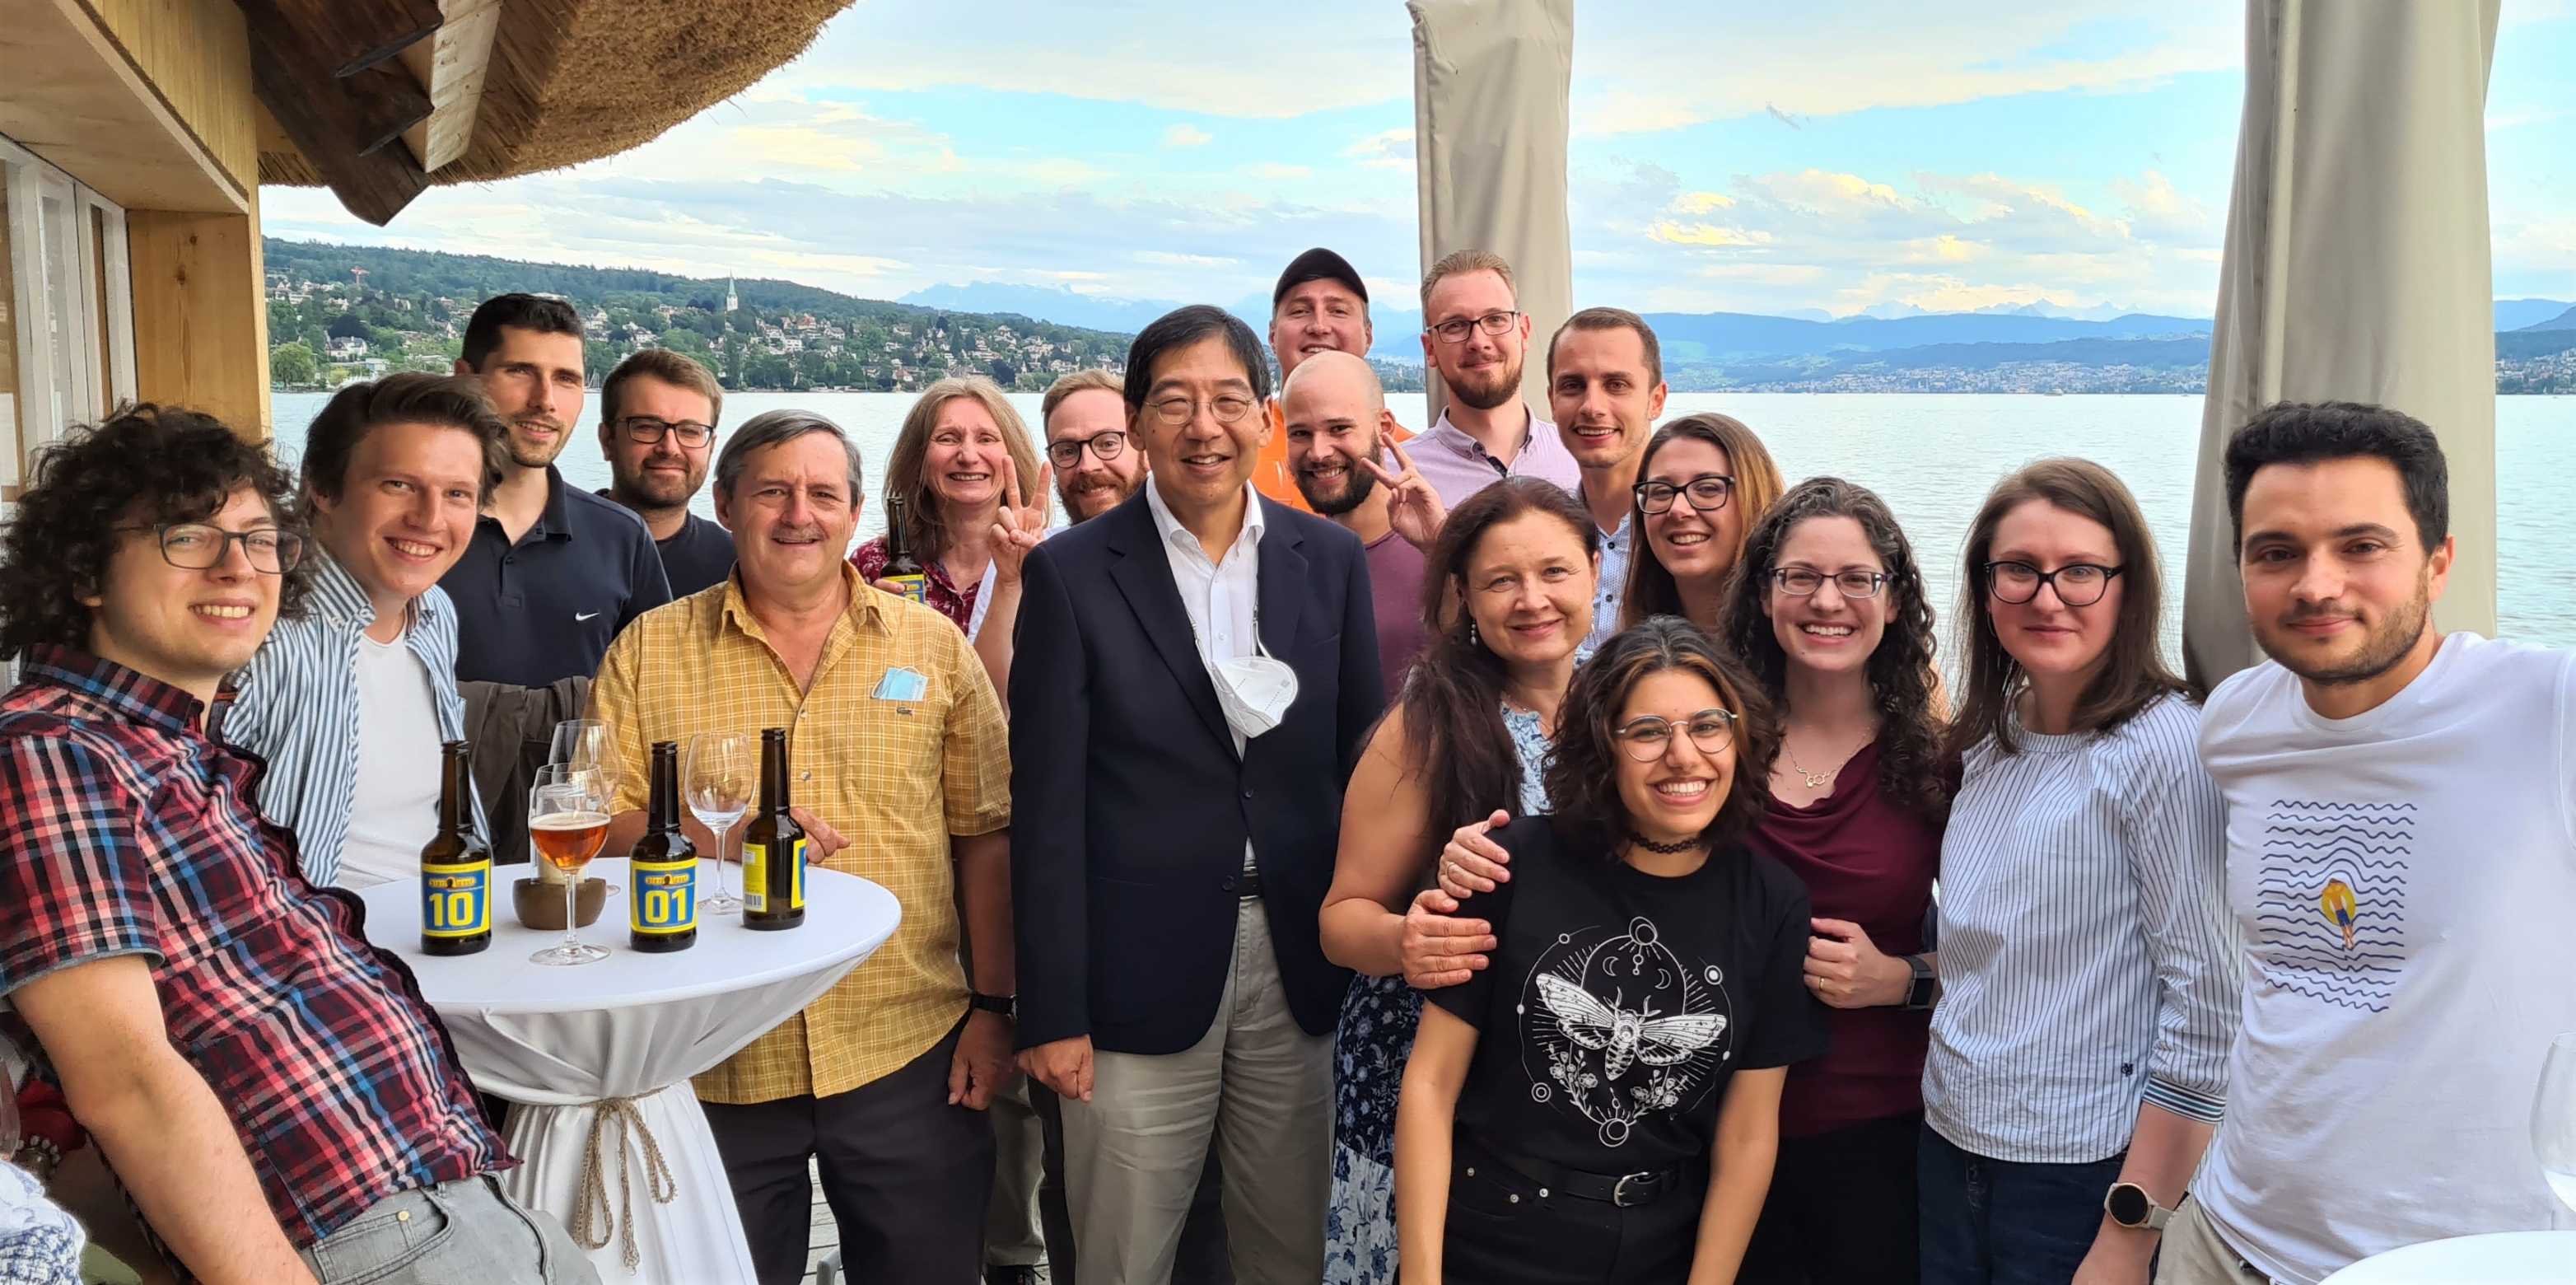 Prof. Chen surrounded by group members, at a restaurant terrasse at the Lake of Zurich on a summer evening in 2021